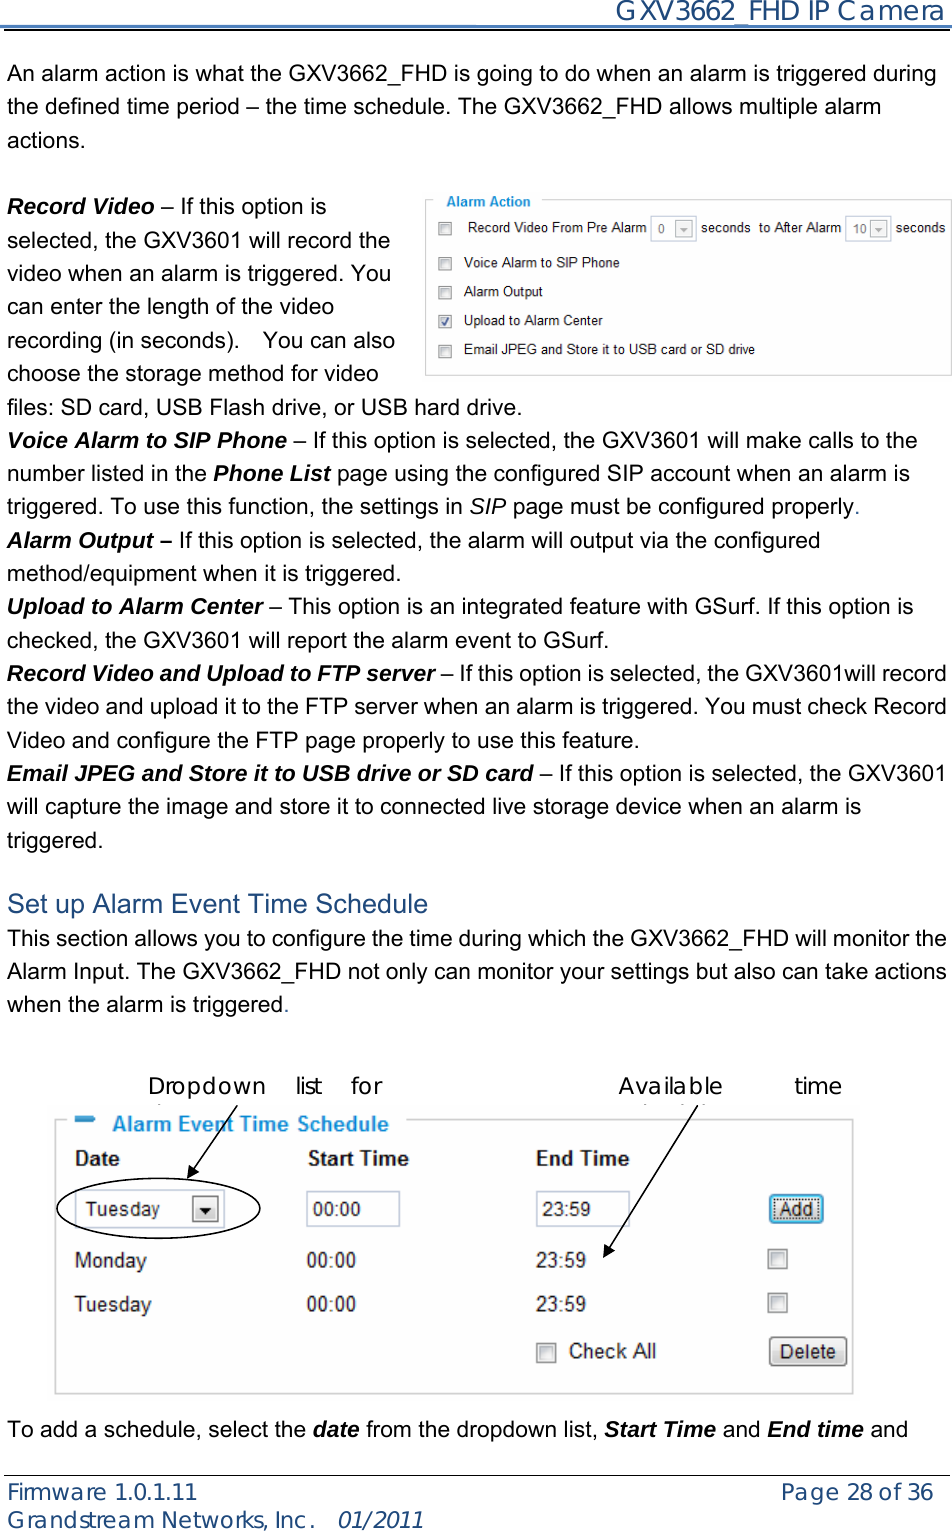     GXV3662_FHD IP Camera Firmware 1.0.1.11                                                   Page 28 of 36     Grandstream Networks, Inc.  01/2011  An alarm action is what the GXV3662_FHD is going to do when an alarm is triggered during the defined time period – the time schedule. The GXV3662_FHD allows multiple alarm actions.   Record Video – If this option is selected, the GXV3601 will record the video when an alarm is triggered. You can enter the length of the video recording (in seconds).    You can also choose the storage method for video files: SD card, USB Flash drive, or USB hard drive. Voice Alarm to SIP Phone – If this option is selected, the GXV3601 will make calls to the number listed in the Phone List page using the configured SIP account when an alarm is triggered. To use this function, the settings in SIP page must be configured properly. Alarm Output – If this option is selected, the alarm will output via the configured method/equipment when it is triggered. Upload to Alarm Center – This option is an integrated feature with GSurf. If this option is checked, the GXV3601 will report the alarm event to GSurf. Record Video and Upload to FTP server – If this option is selected, the GXV3601will record the video and upload it to the FTP server when an alarm is triggered. You must check Record Video and configure the FTP page properly to use this feature. Email JPEG and Store it to USB drive or SD card – If this option is selected, the GXV3601 will capture the image and store it to connected live storage device when an alarm is triggered.  Set up Alarm Event Time Schedule   This section allows you to configure the time during which the GXV3662_FHD will monitor the Alarm Input. The GXV3662_FHD not only can monitor your settings but also can take actions when the alarm is triggered.               To add a schedule, select the date from the dropdown list, Start Time and End time and Available time schedules Dropdown list for date 